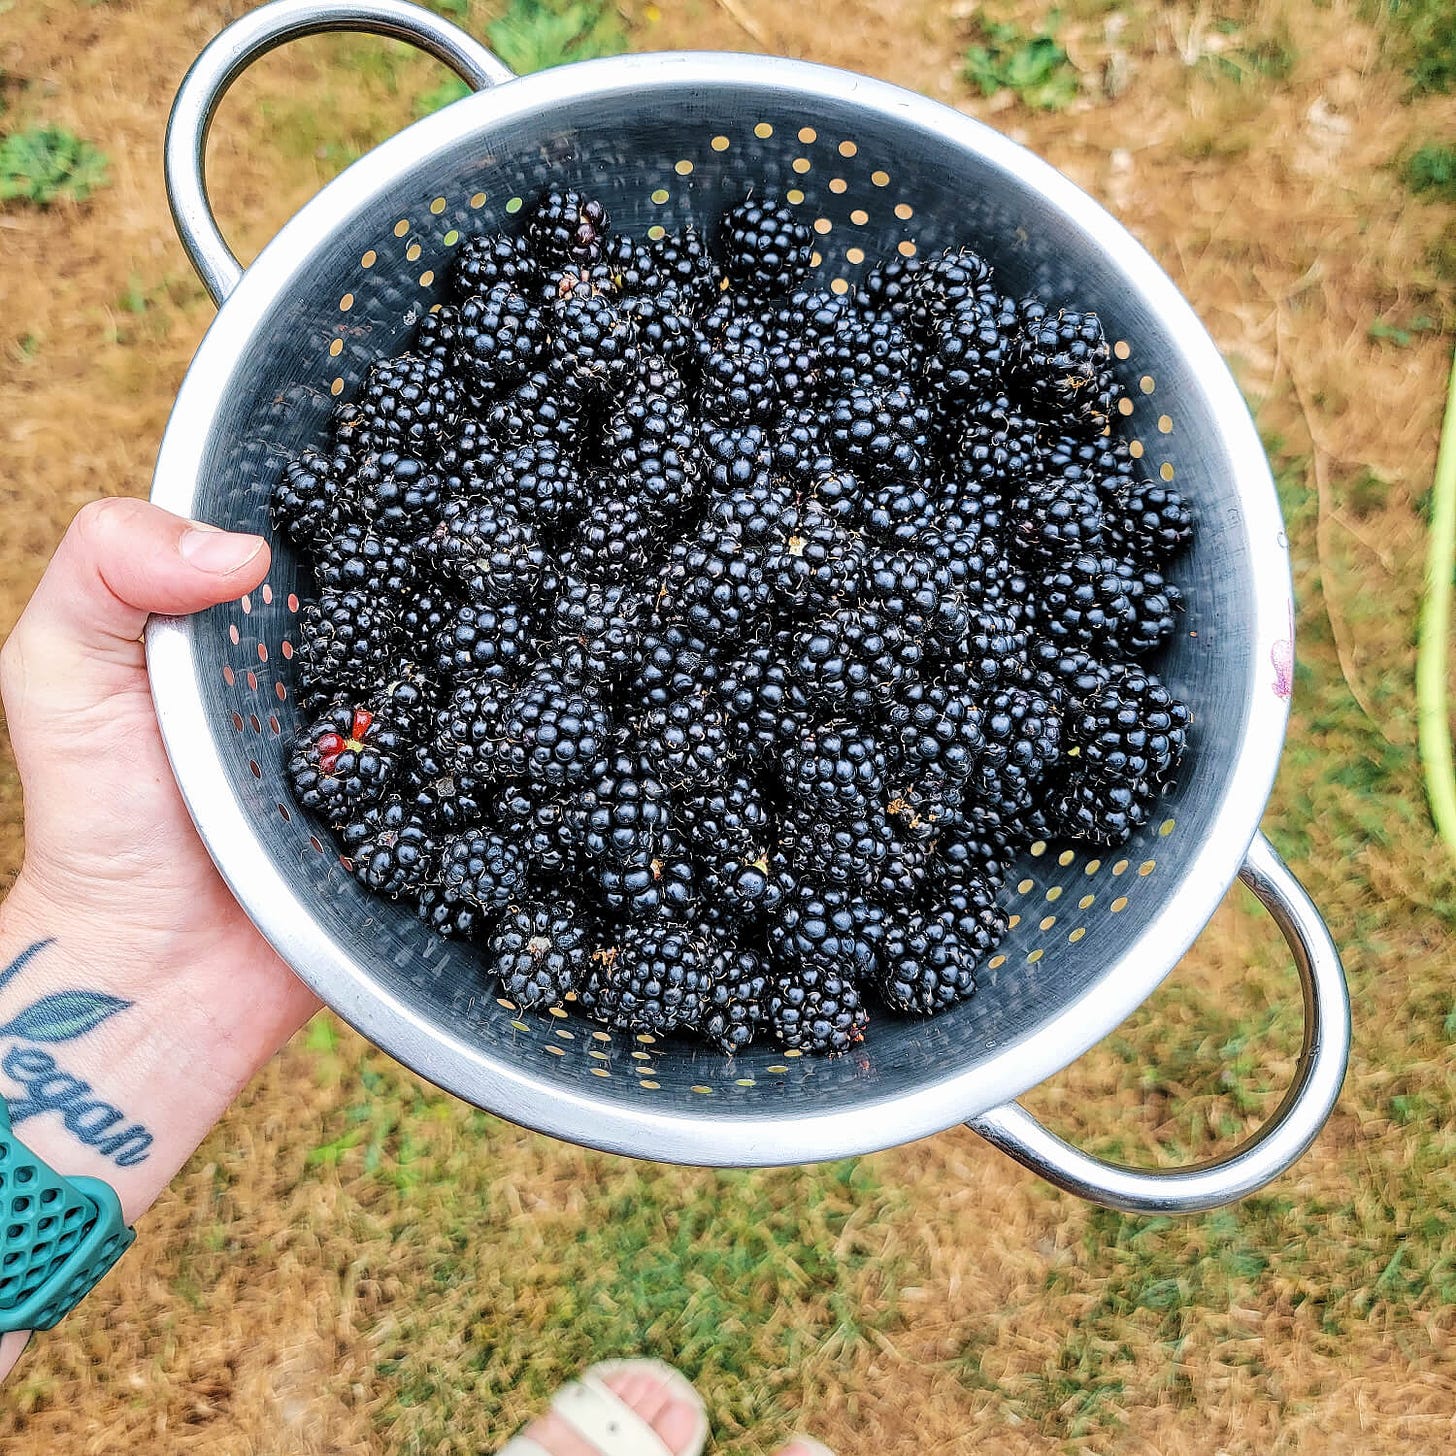 a metal collander filled with about 6 cups of fresh picked blackberries, held over a patch of late summer patchy grass